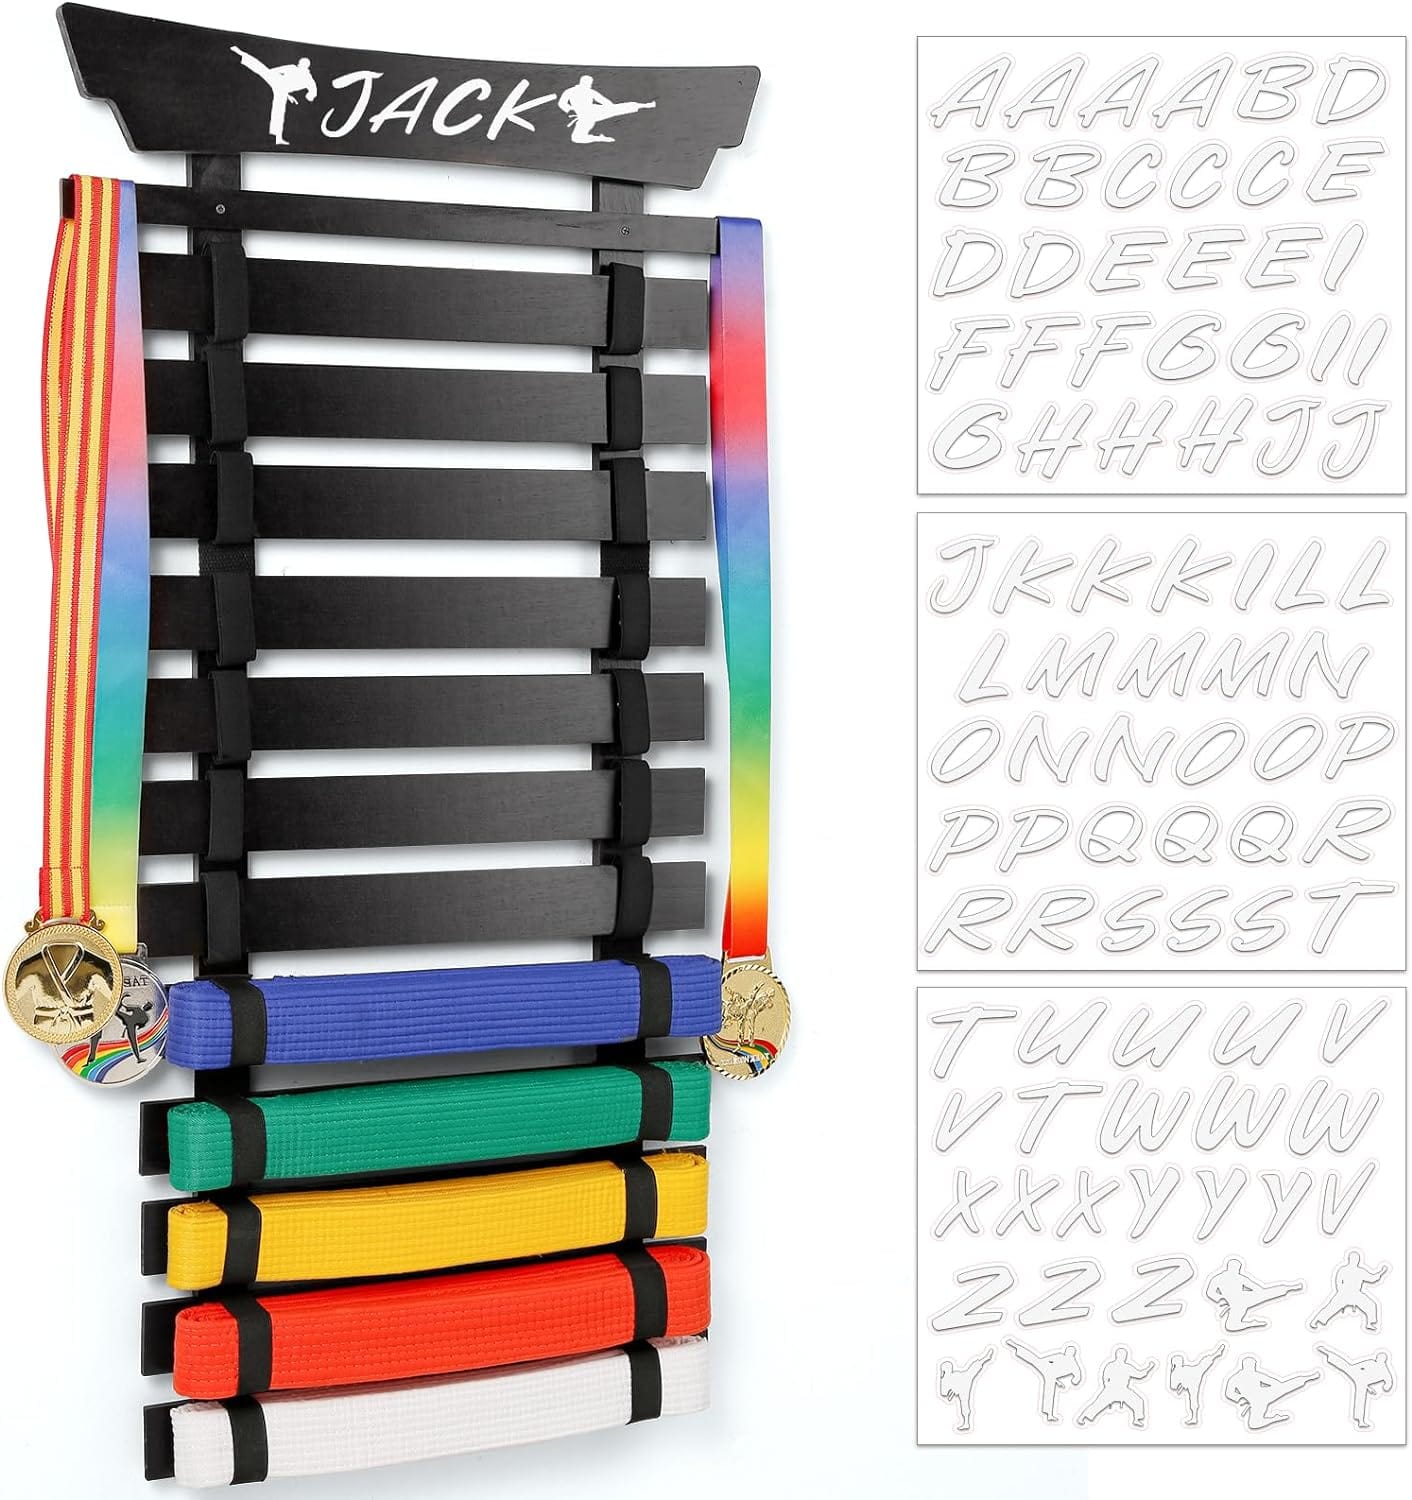 Eclipse Martial Art Supplies sporting goods Black 12 Belts Karate Belt Display Rack with Stickers, Martial Arts Belt Display Holder, Taekwondo Belt Jiu Jitsu Belt BJJ Belt Display Hanging Holder for Kids and Adults Gifts